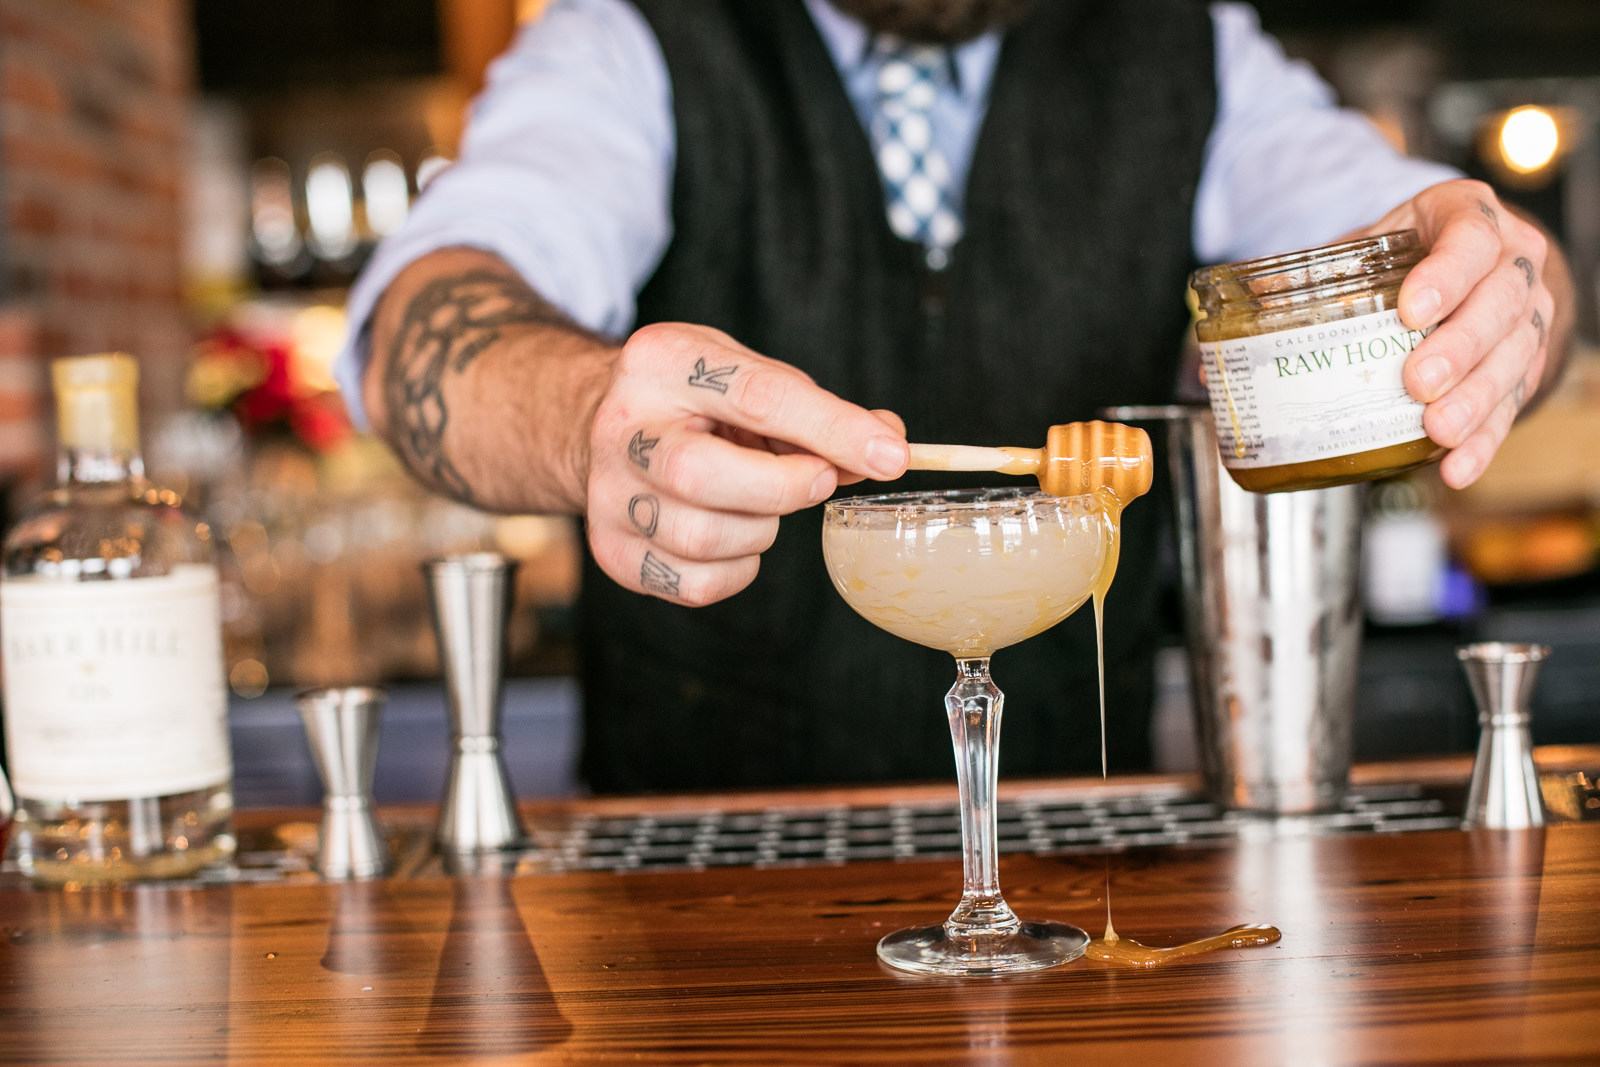 A bartender makes Caledonia Spirits cocktails at Waterworks in Winooski, Vermont. by Reciprocity Studio for Caledonia Spirits.